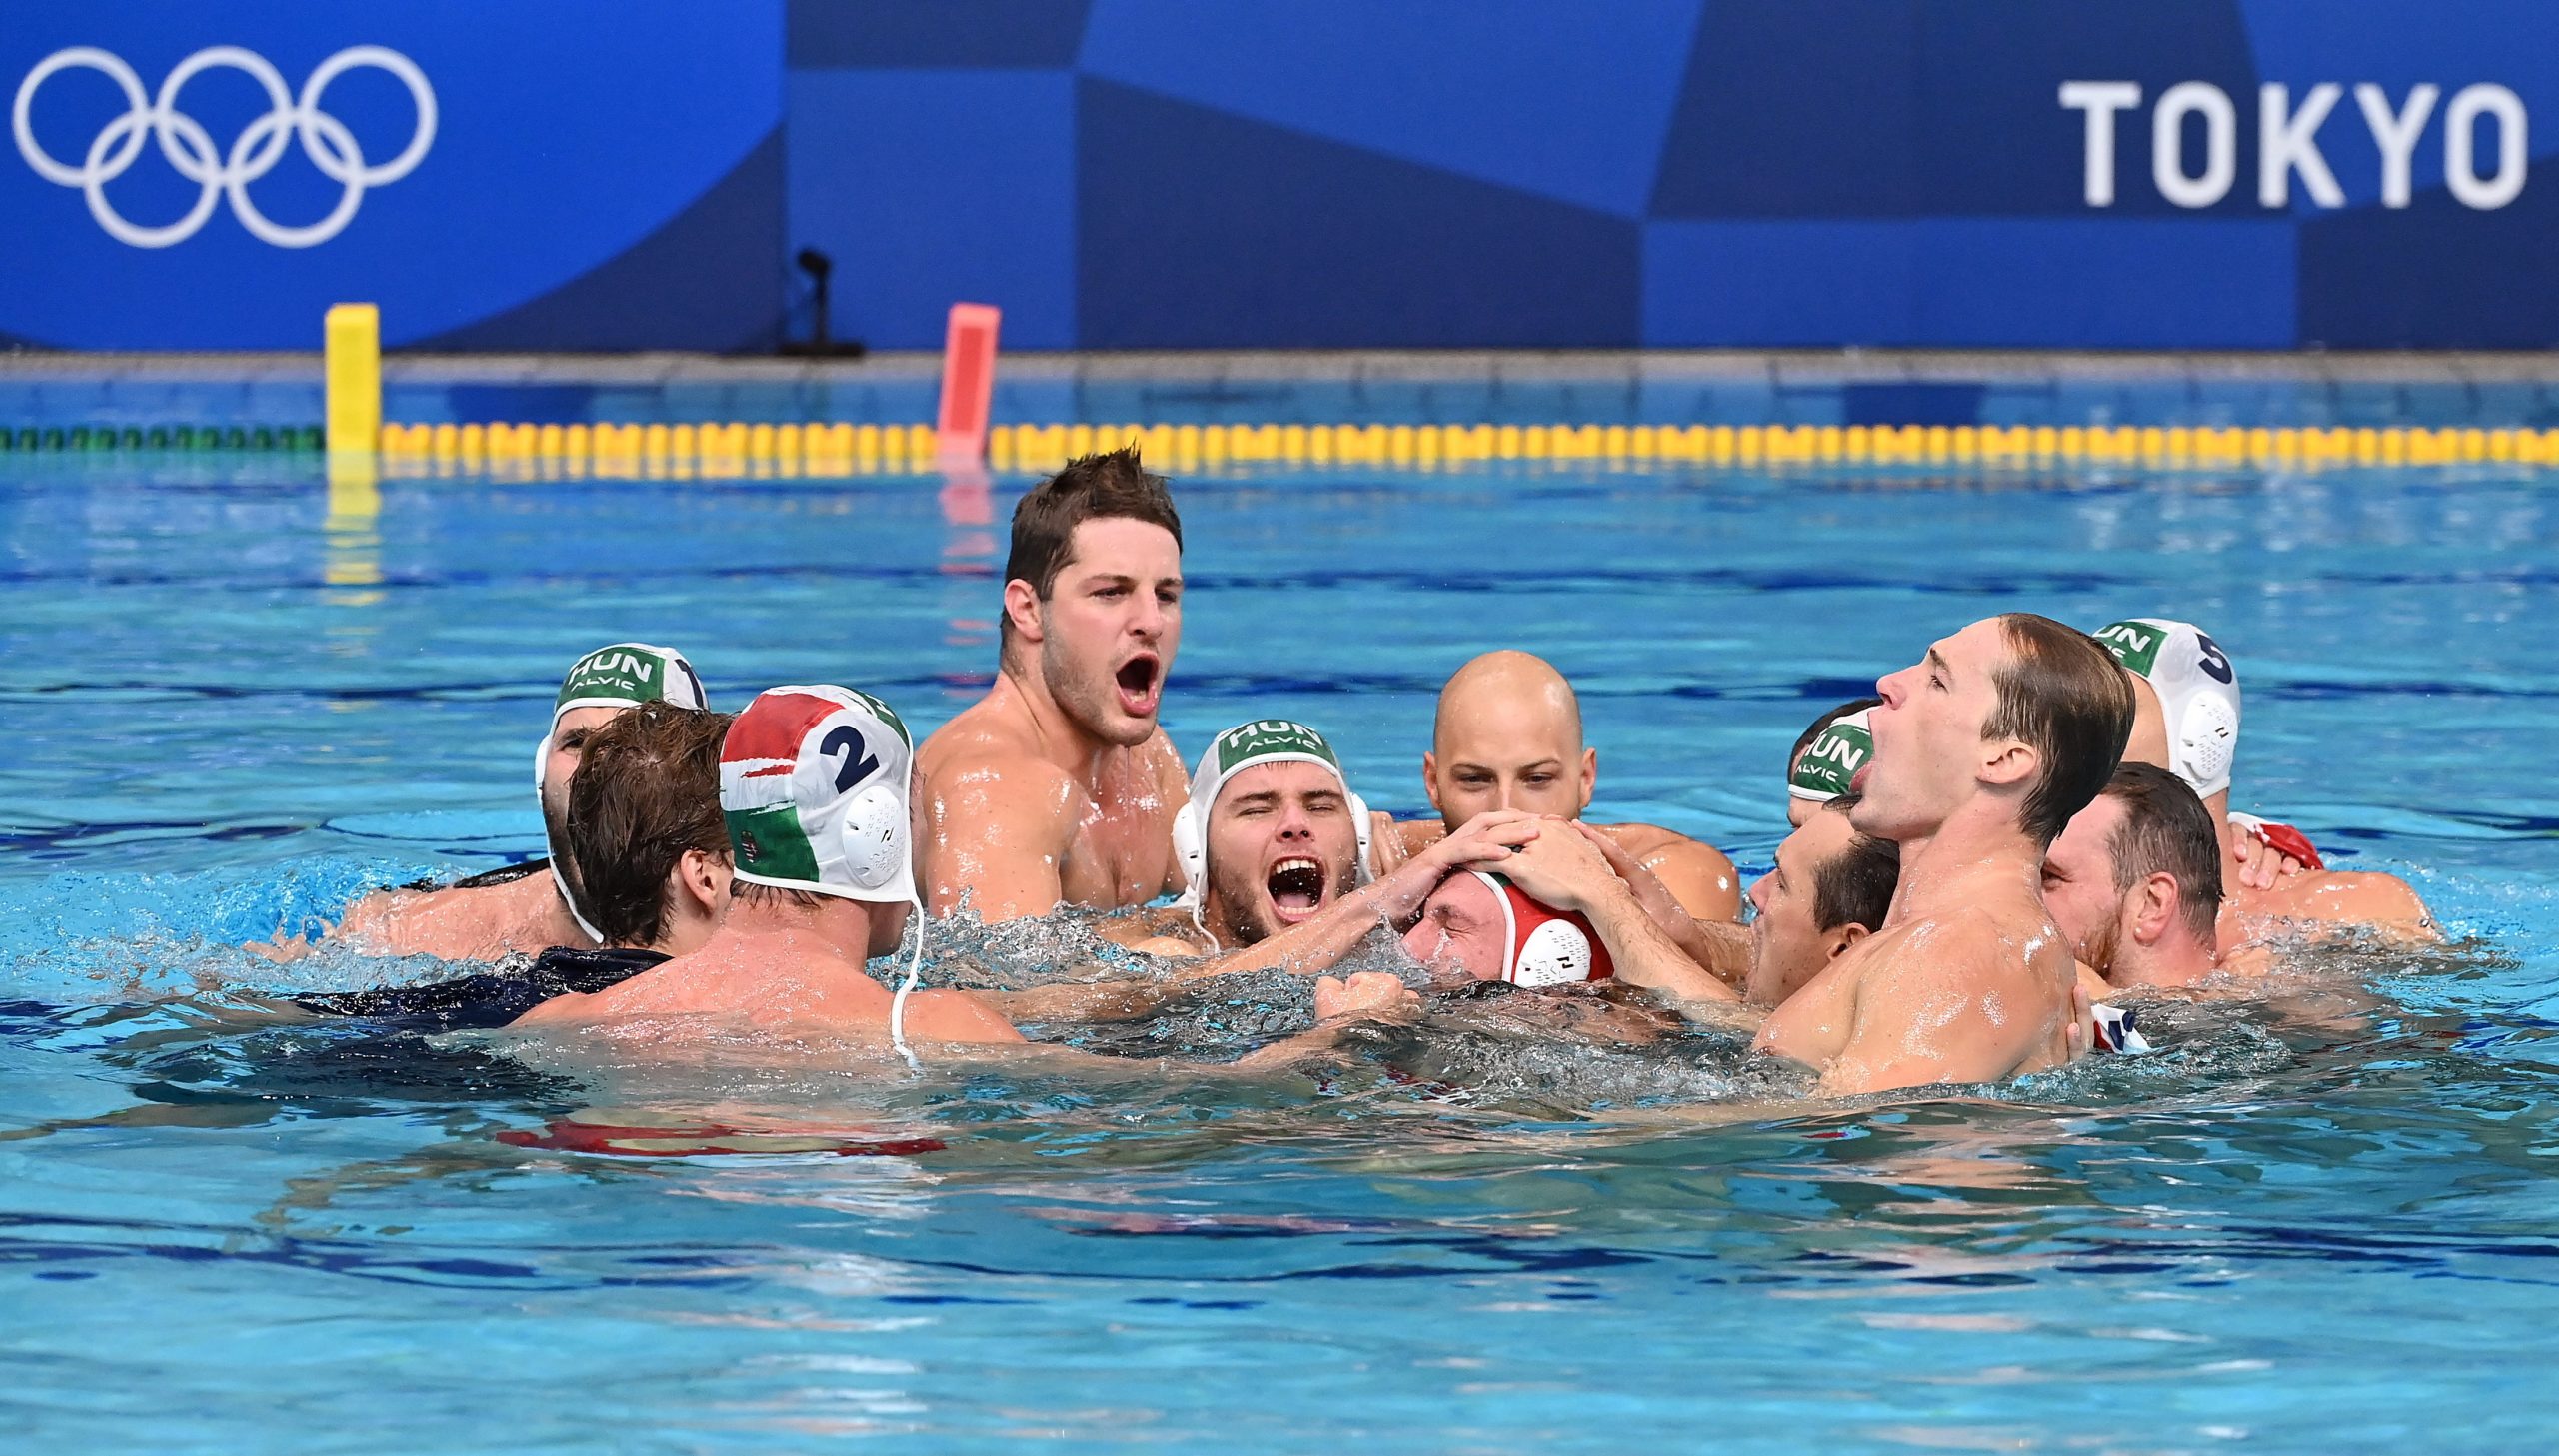 Hungary Beats Spain to Claim Bronze in Men’s Water Polo